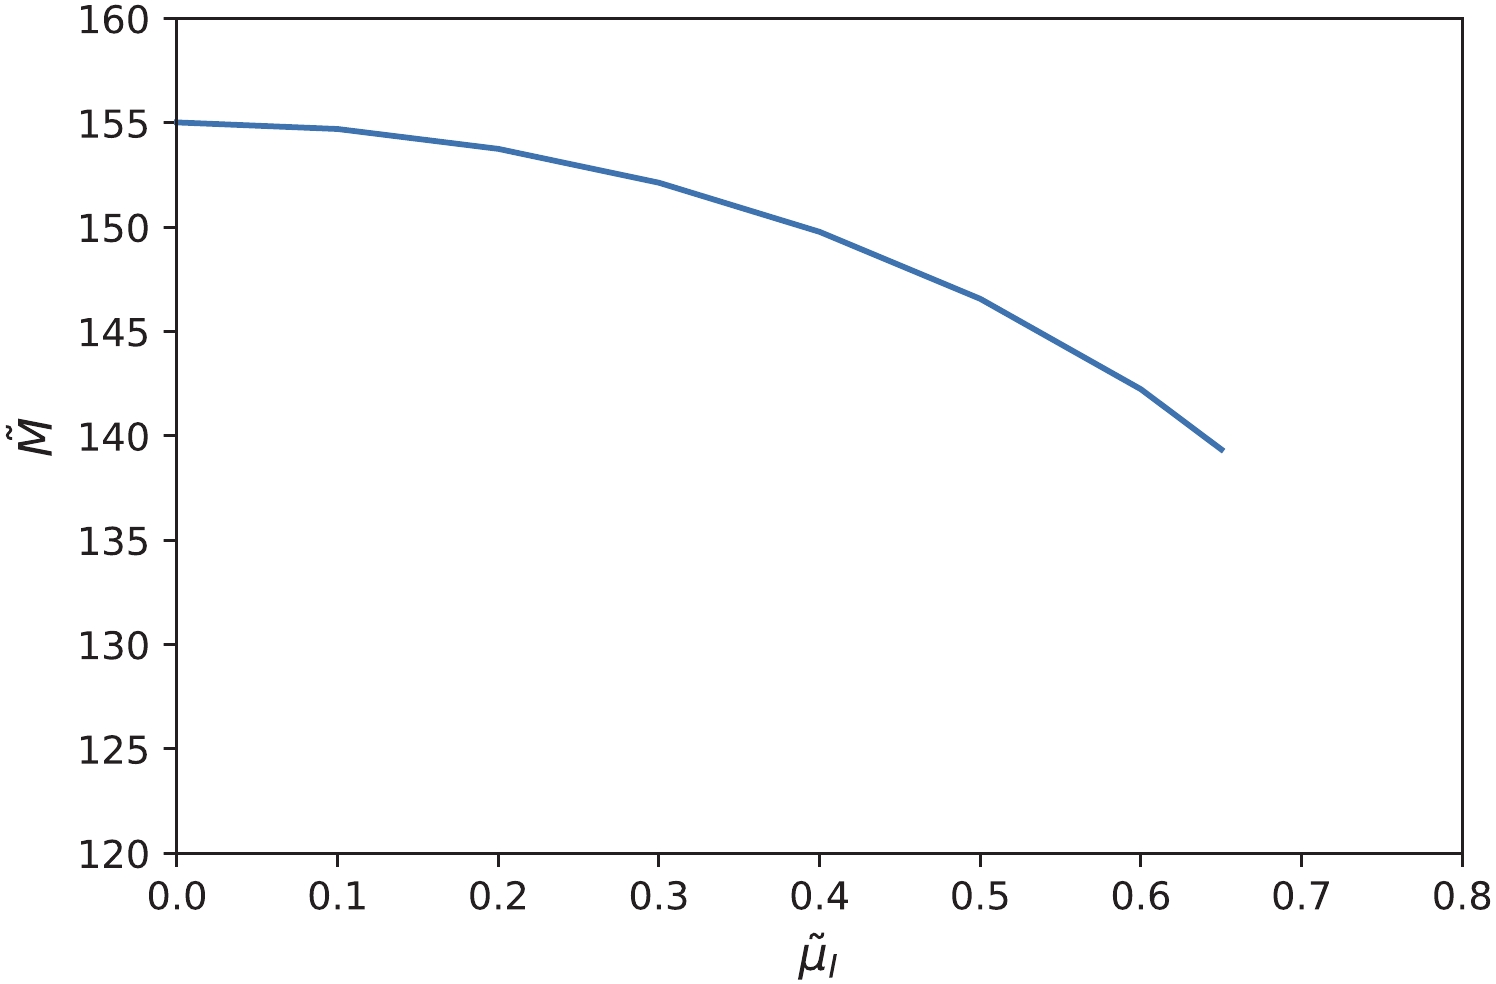 (color online) The soliton mass as a function of the isospin chemical potential for the spherically symmetric hedgehog ansatz. For , the soliton mass is almost stable, while for the soliton mass decreases with the increase of the isospin chemical potential. The curve stops at , which is close to .